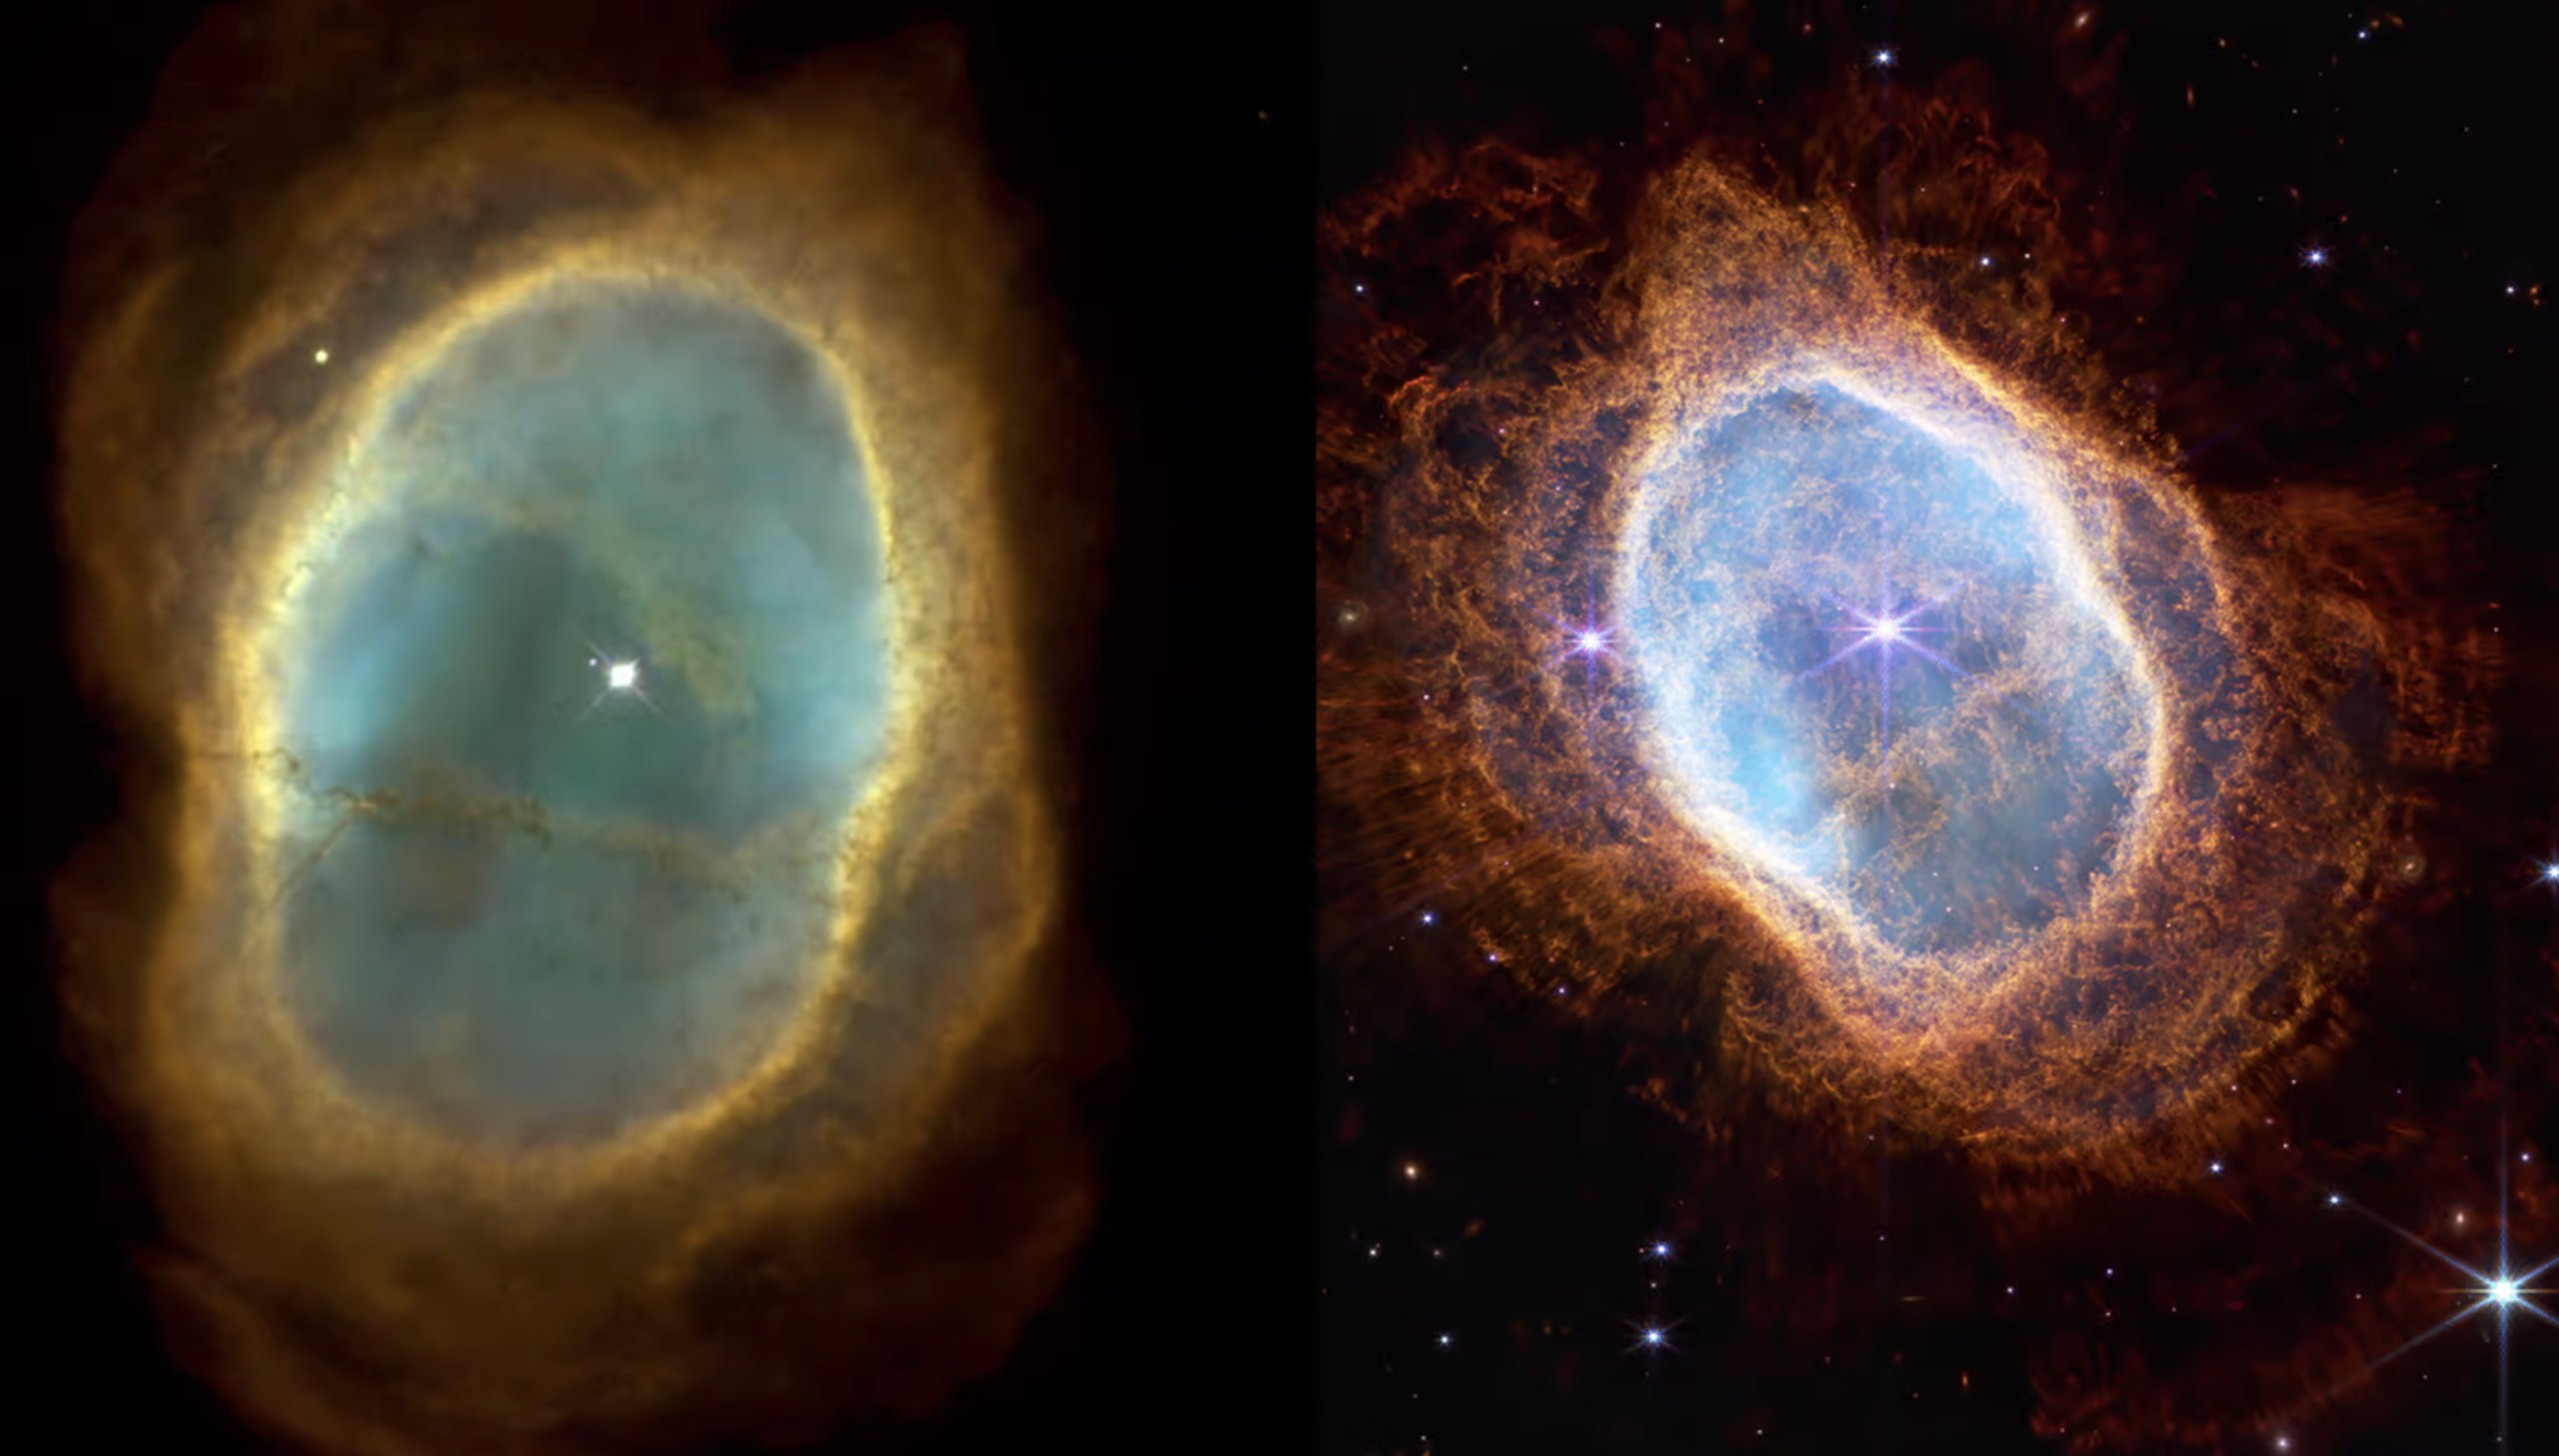 The Southern Ring Nebula as seen by Hubble (left) and Webb (right). NASA, ESA, CSA, and STScI.